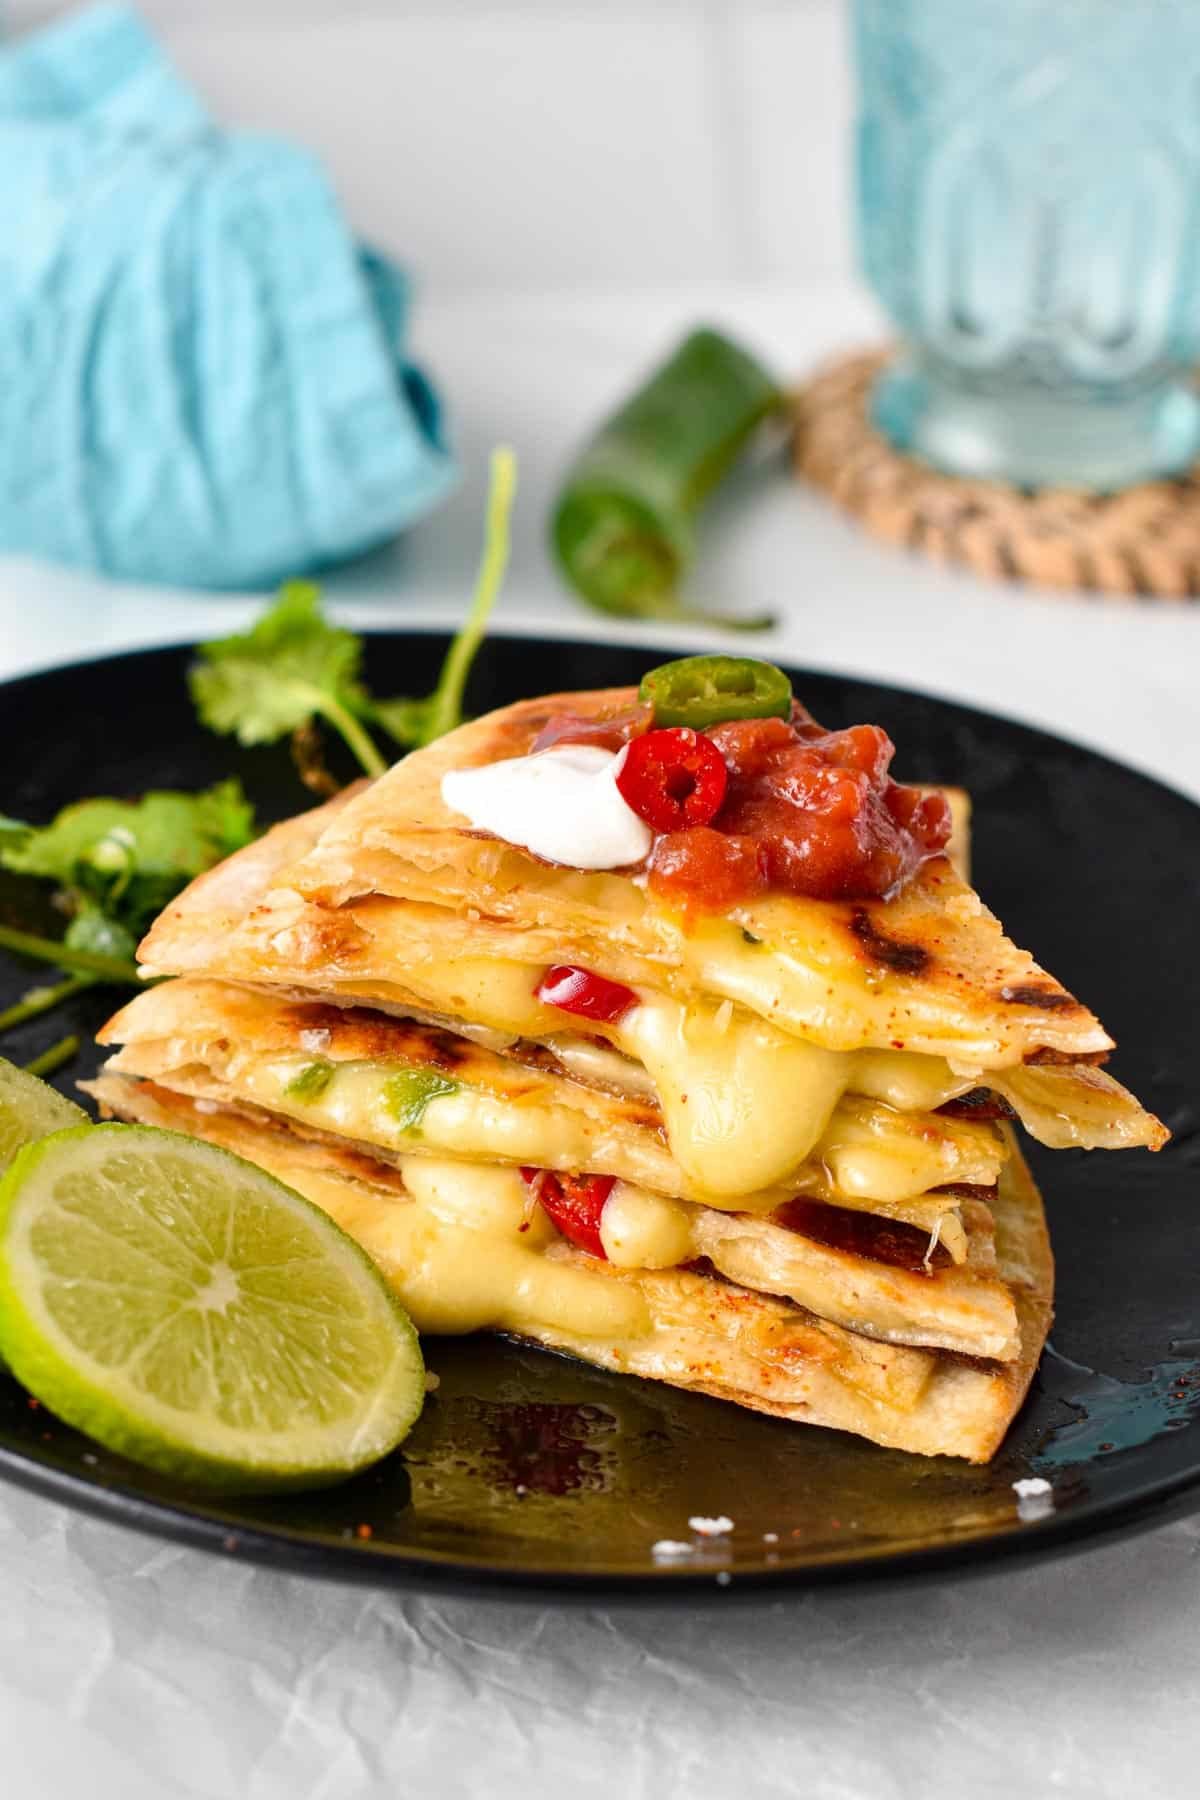 This easy Cheese Quesadilla also called Queso quesadilla is a crispy flour tortilla filled with stringy melted cheese and pieces of jalapeno. This is the perfect 10 minutes lunch for cheese lovers, easy to adapt by throwing in any extra vegetables or proteins you have on hand.